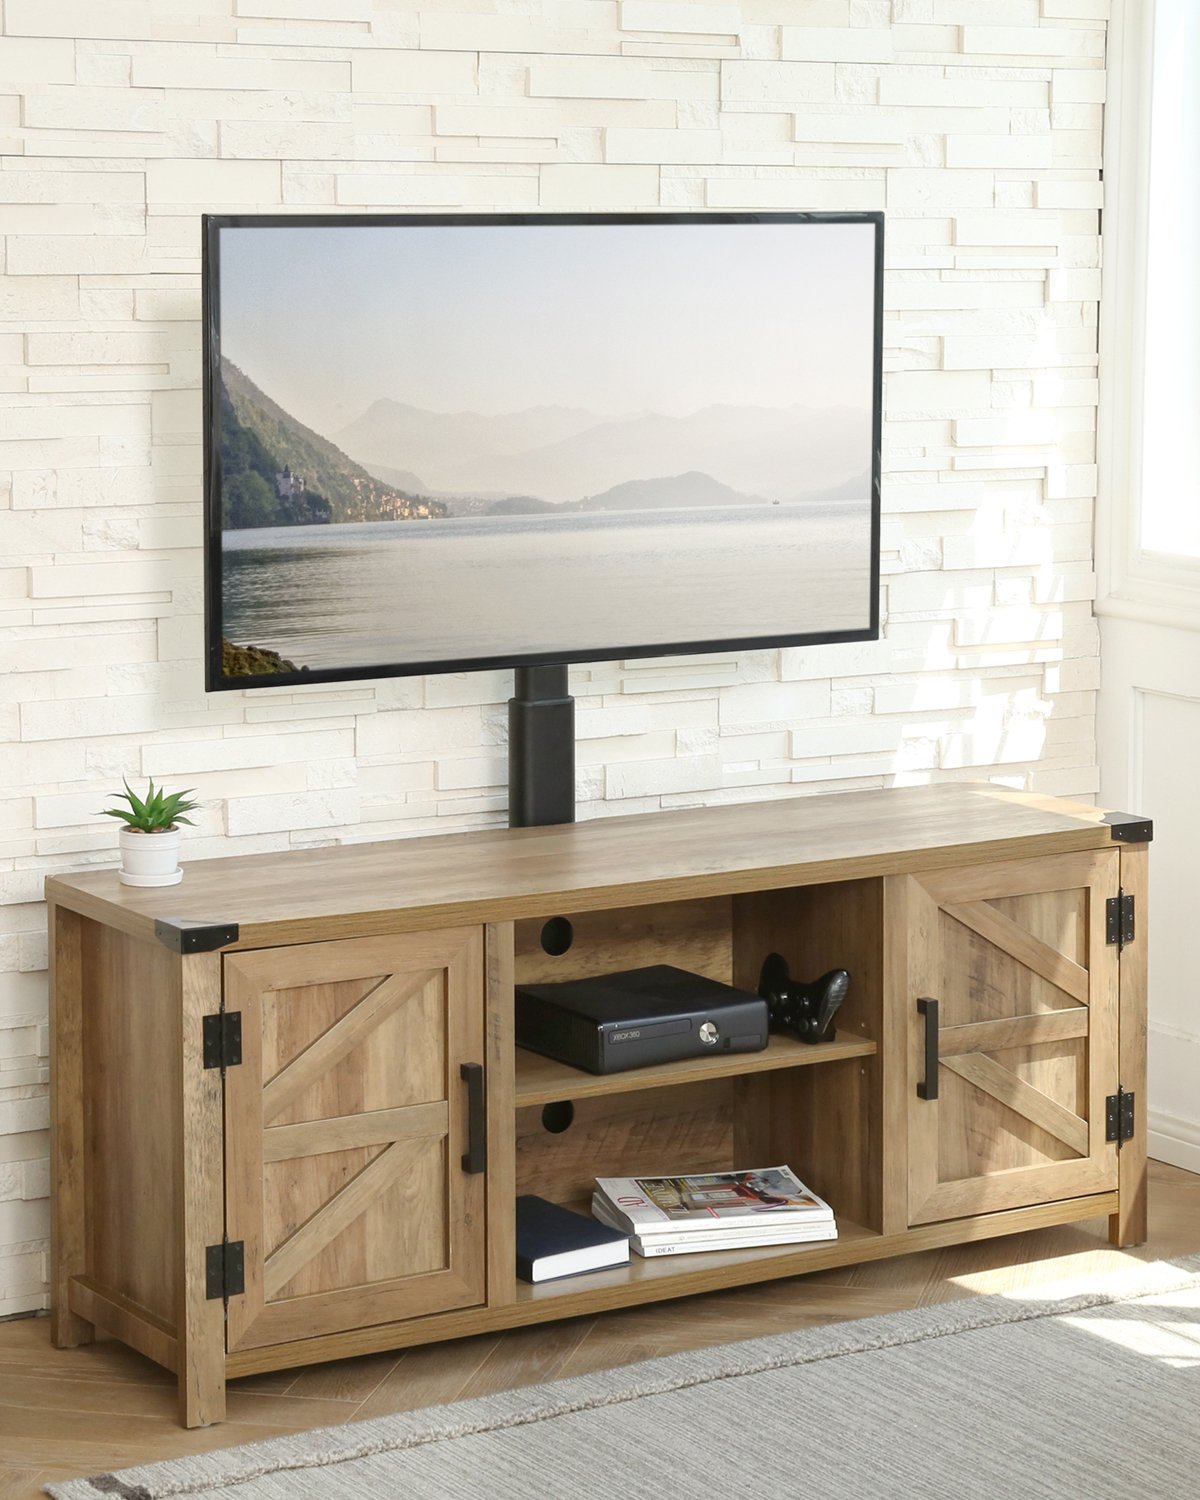 TV floor stand Series-E 32-65 inch